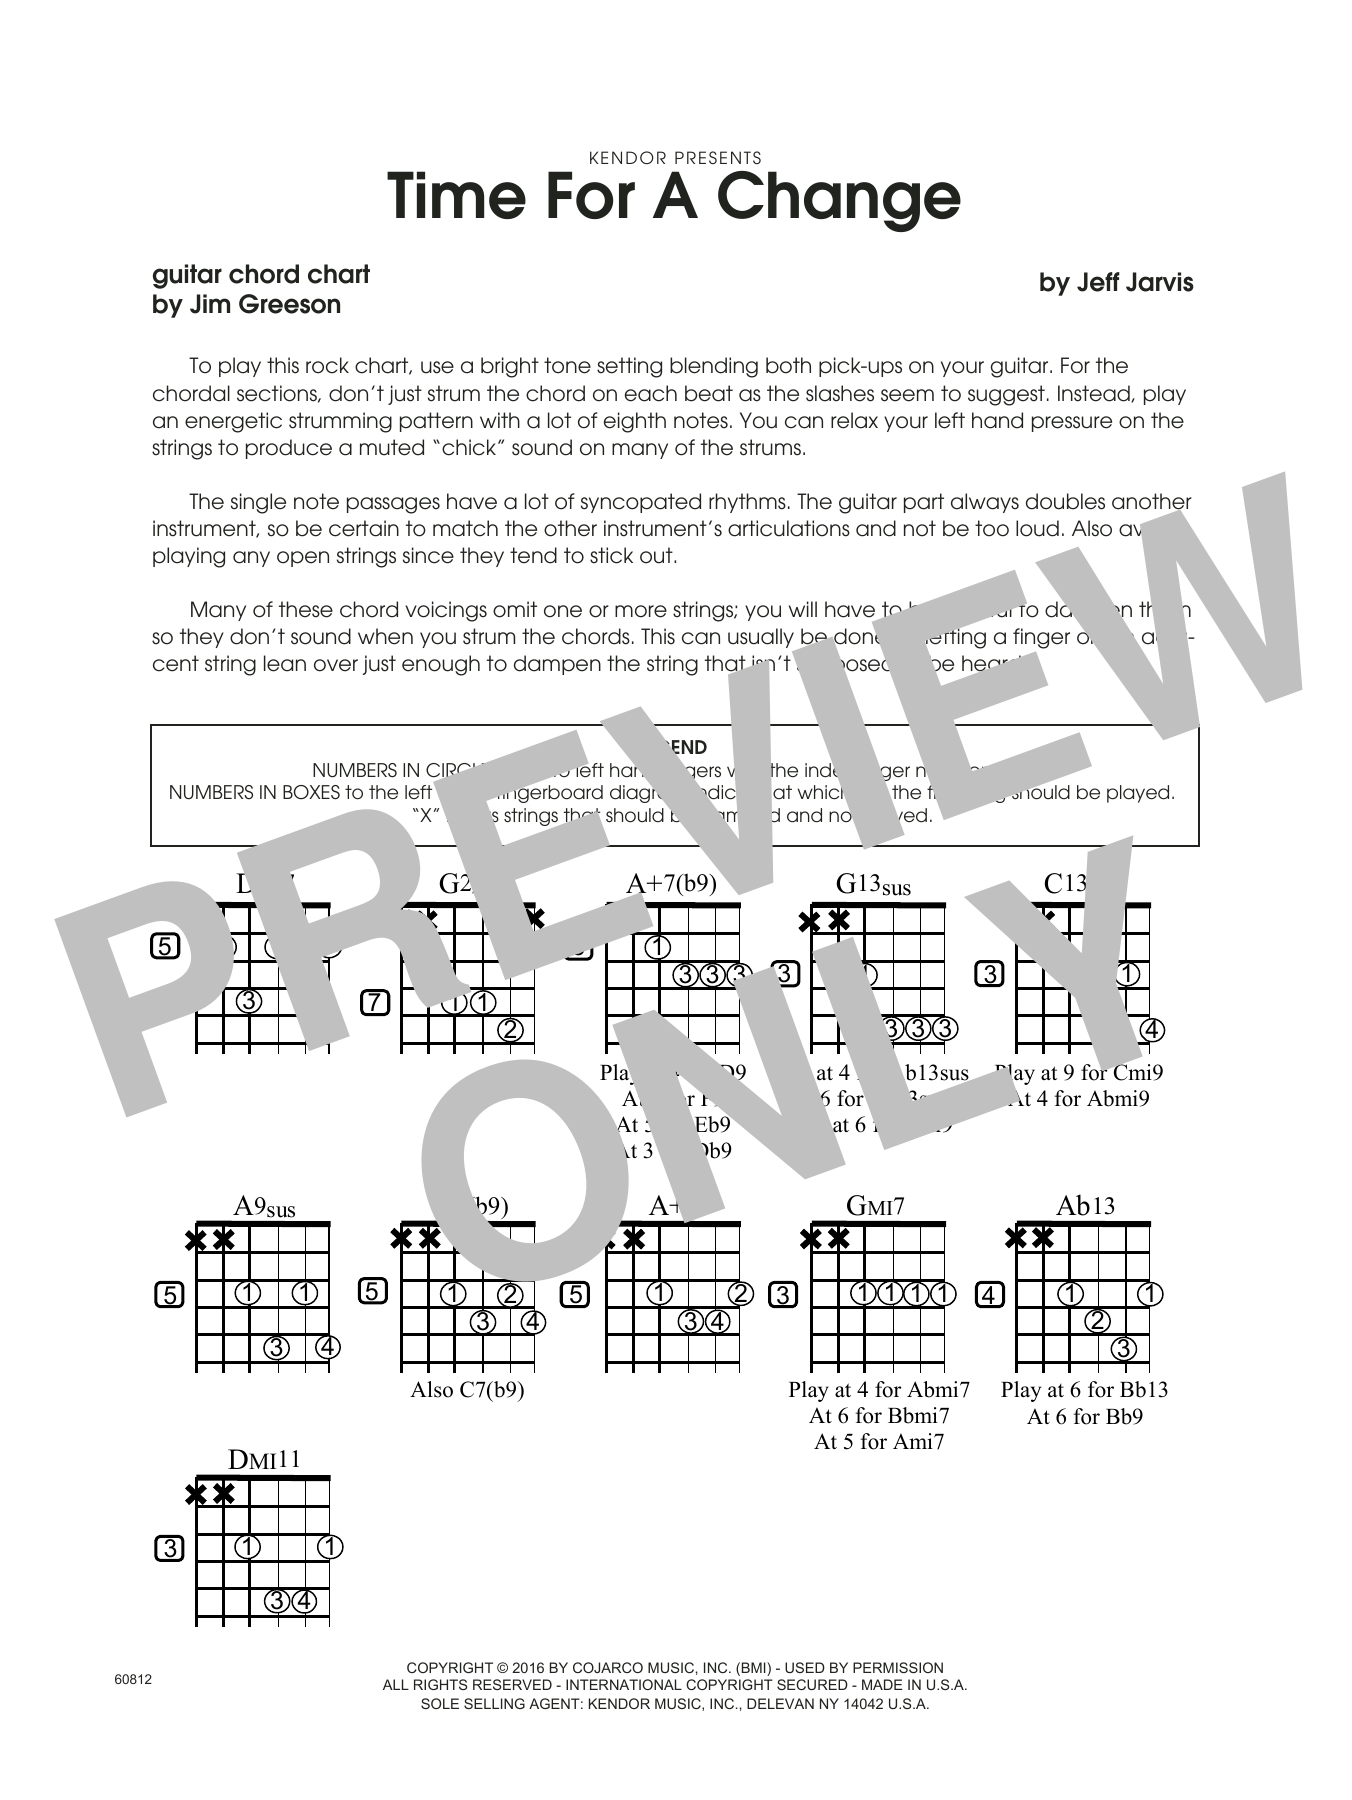 Time For A Change - Guitar Chord Chart (Jazz Ensemble) von Jeff Jarvis